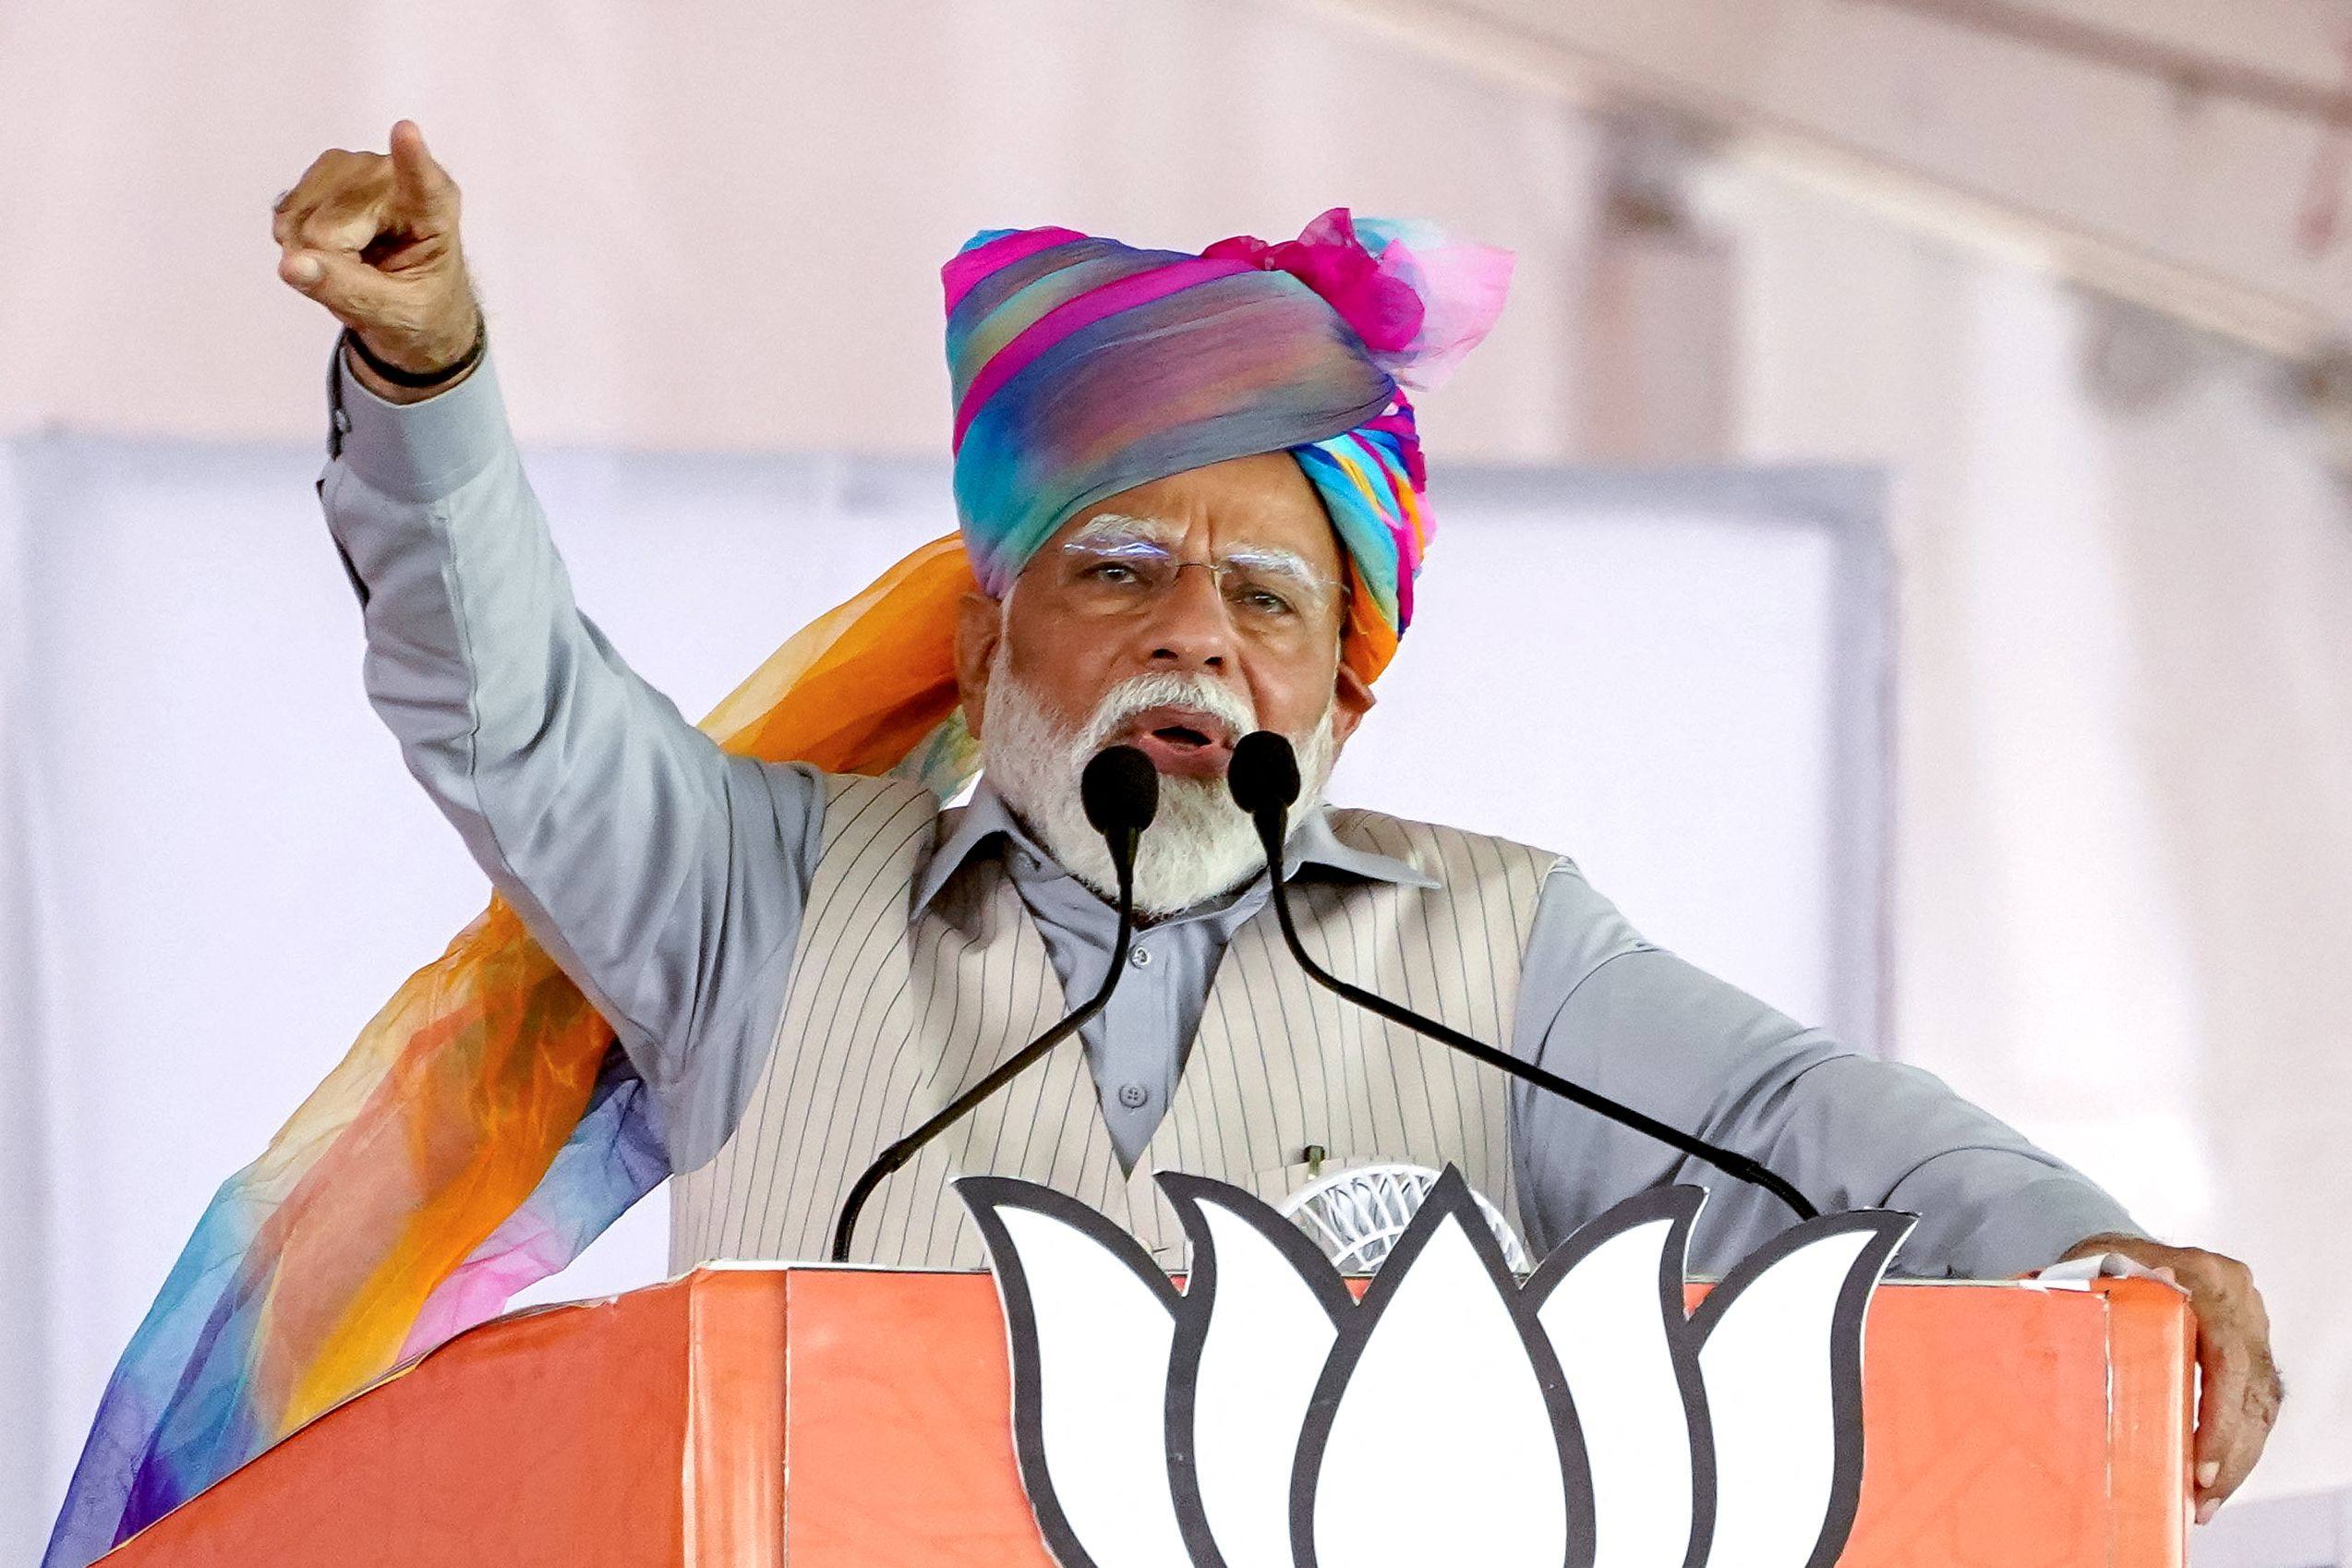 Indian Prime Minister Narendra Modi addresses supporters at a campaign rally in Pushkar, Rajasthan state, earlier this month. His continued use of sectarian politics has raised concerns about a breach of election standards. Photo: AFP